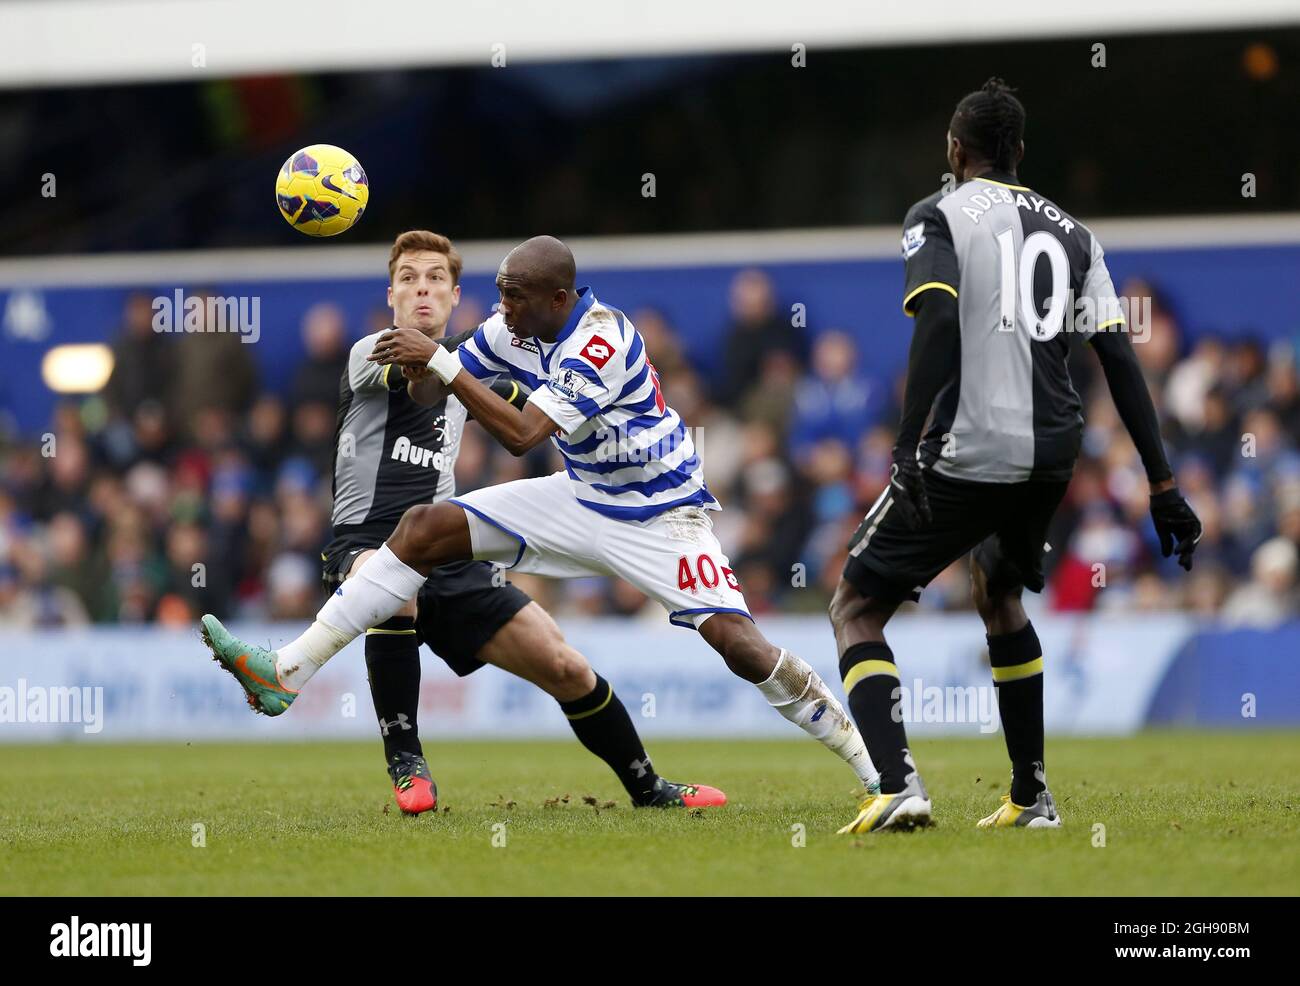 QPR's Stephane Mbia tussles with Tottenham's Scott Parker during the Barclays Premier League between Queens Park Rangers and Tottenham Hotspur at the Loftus Road in London on January 12, 2013. David Klein Stock Photo